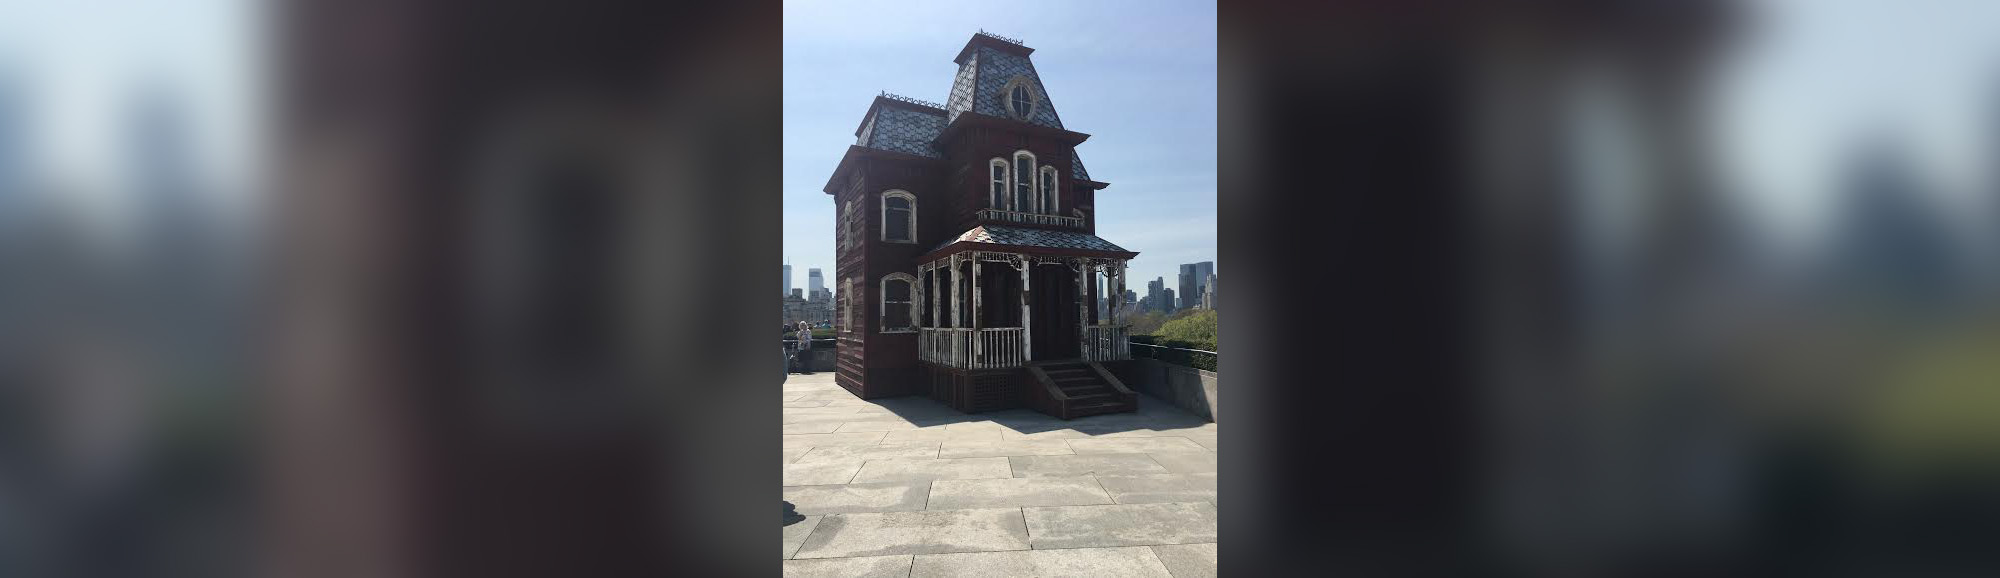 PHOTO: Transitional Object (PsychoBarn), a large-scale sculpture by acclaimed British artist Cornelia Parker, is on view now atop the roof of the Metropolitan Museum of Art in New York City.